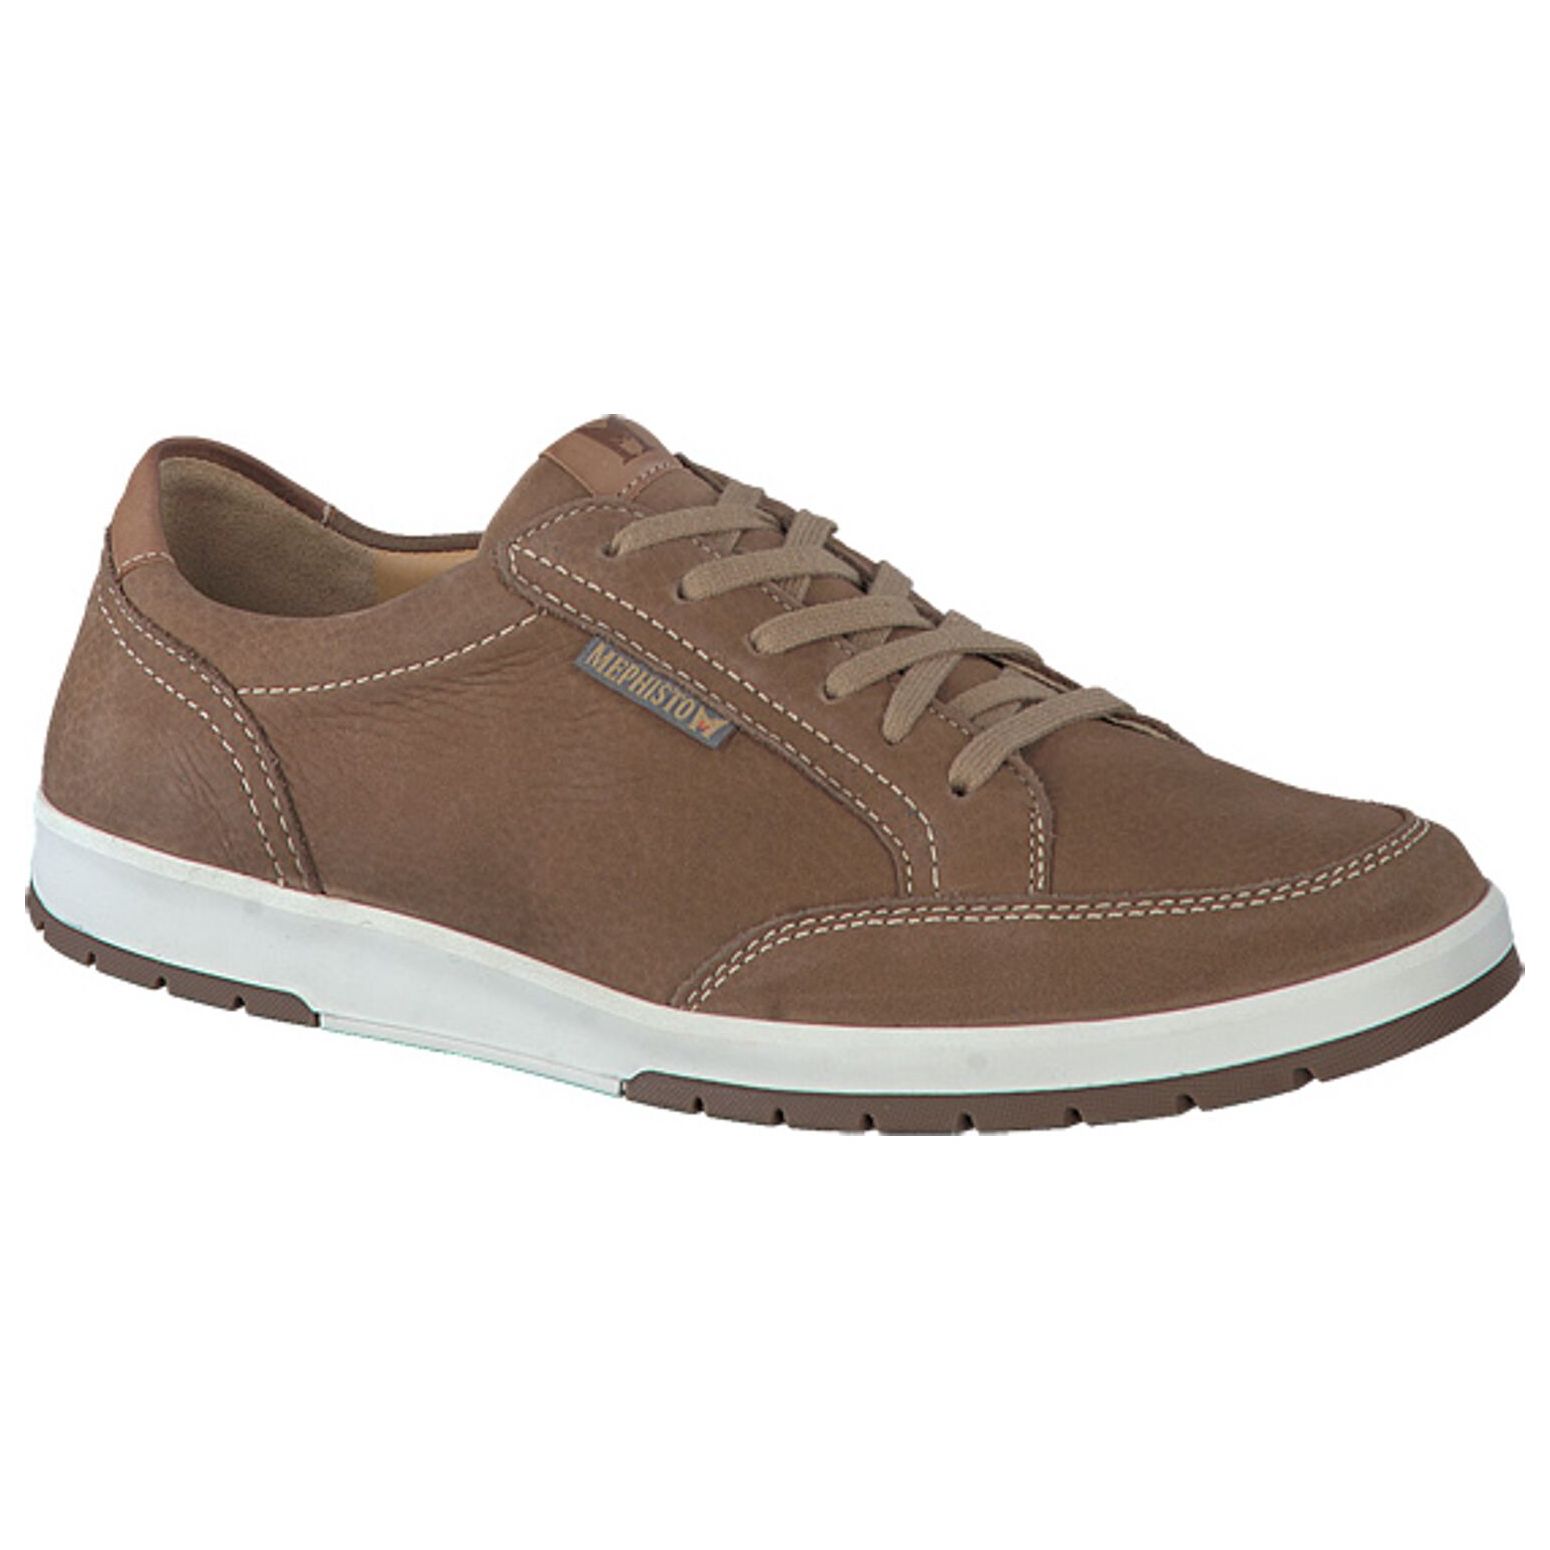 mephisto casual shoes